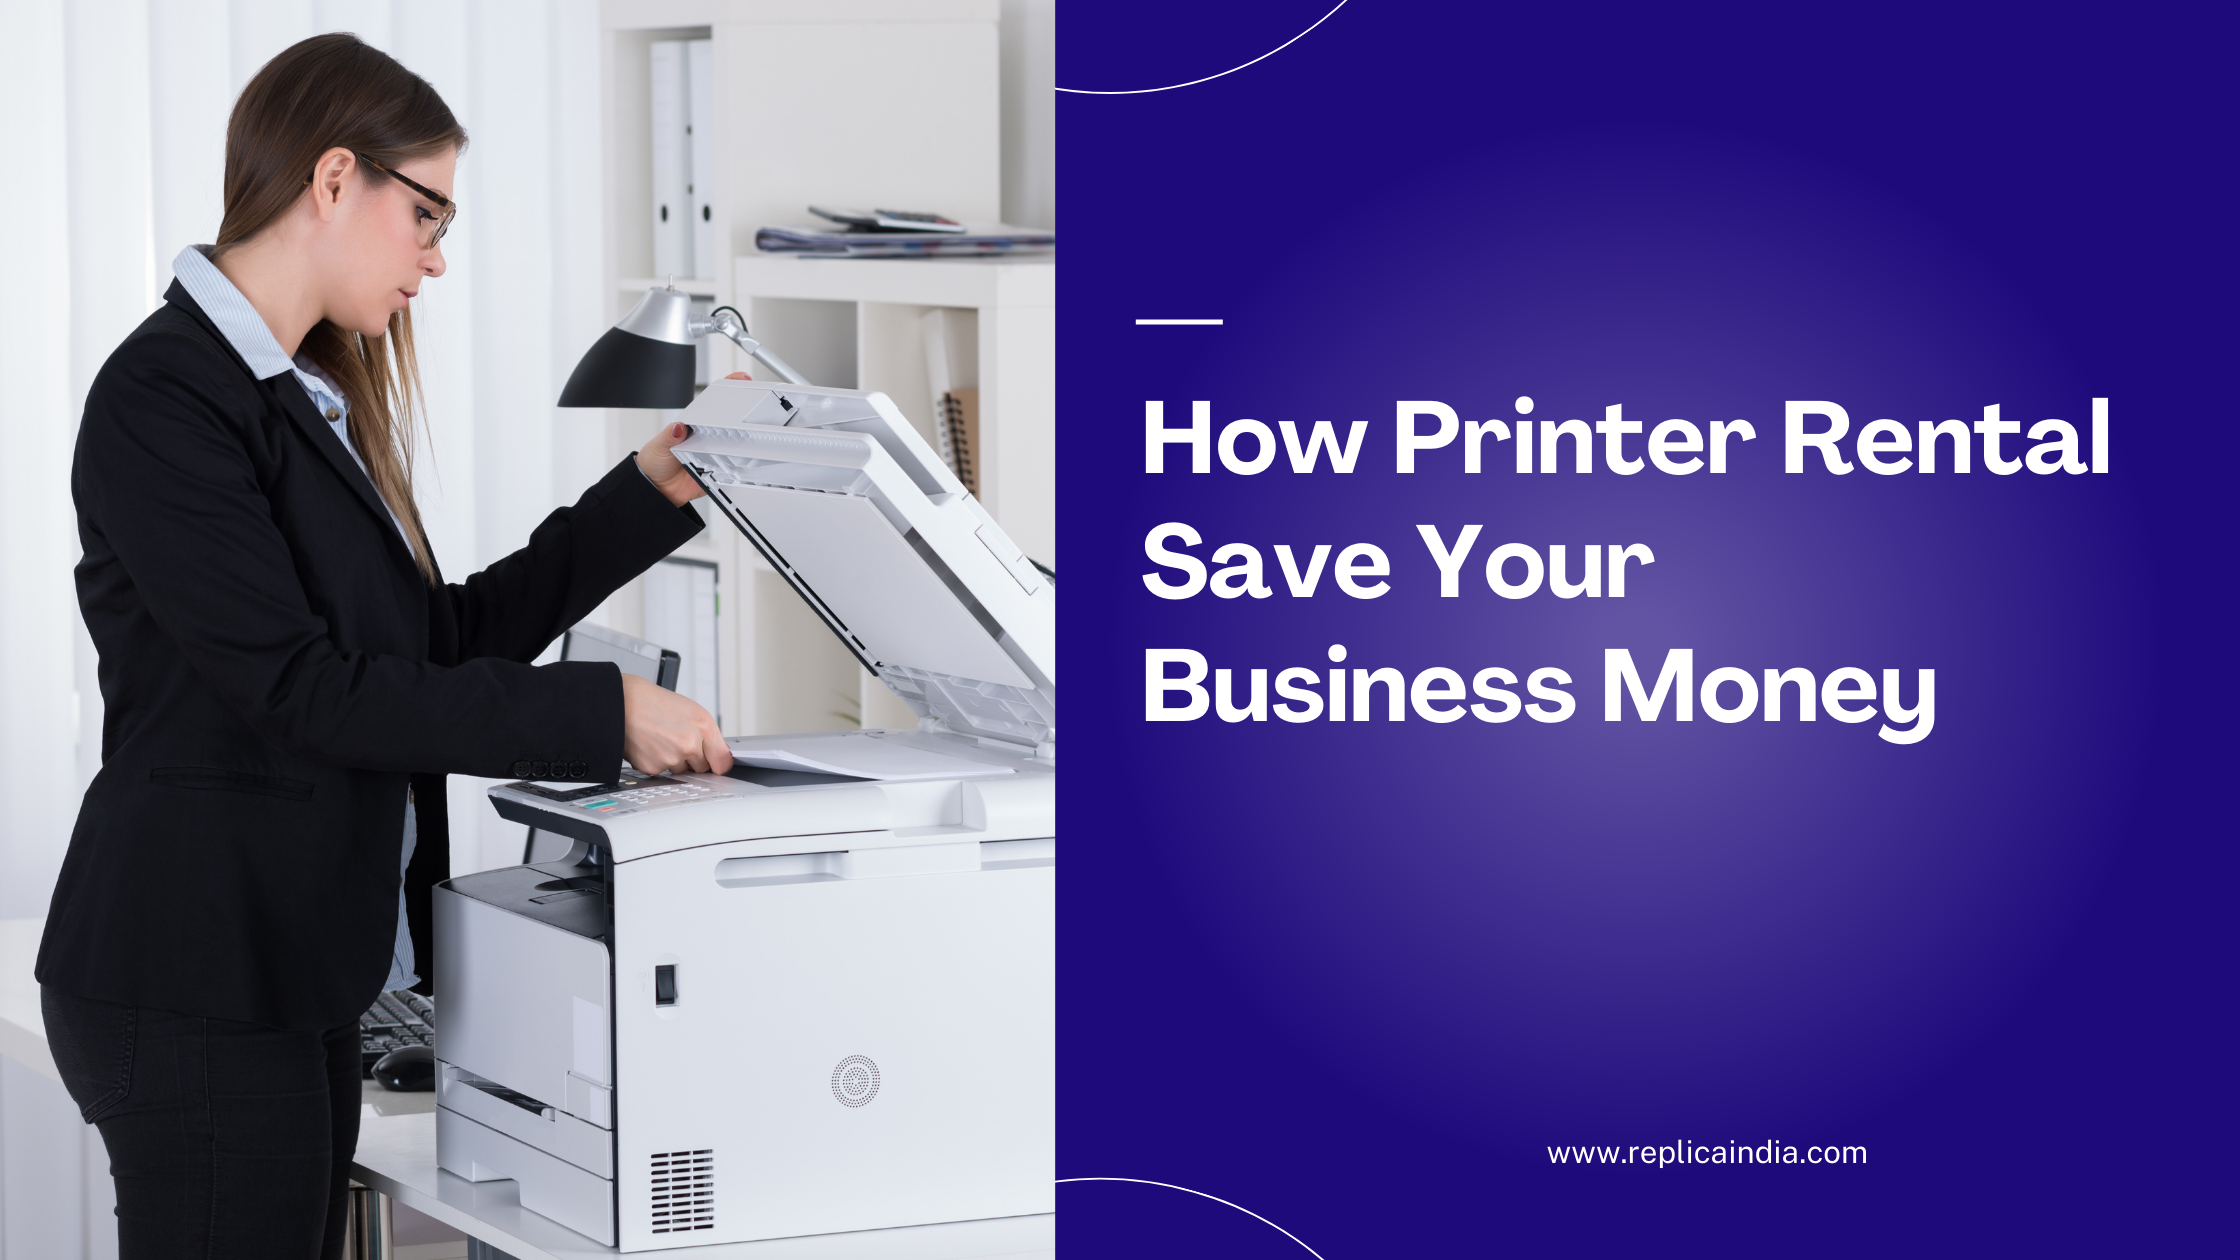 How Printer Rental Can Save Your Business Money